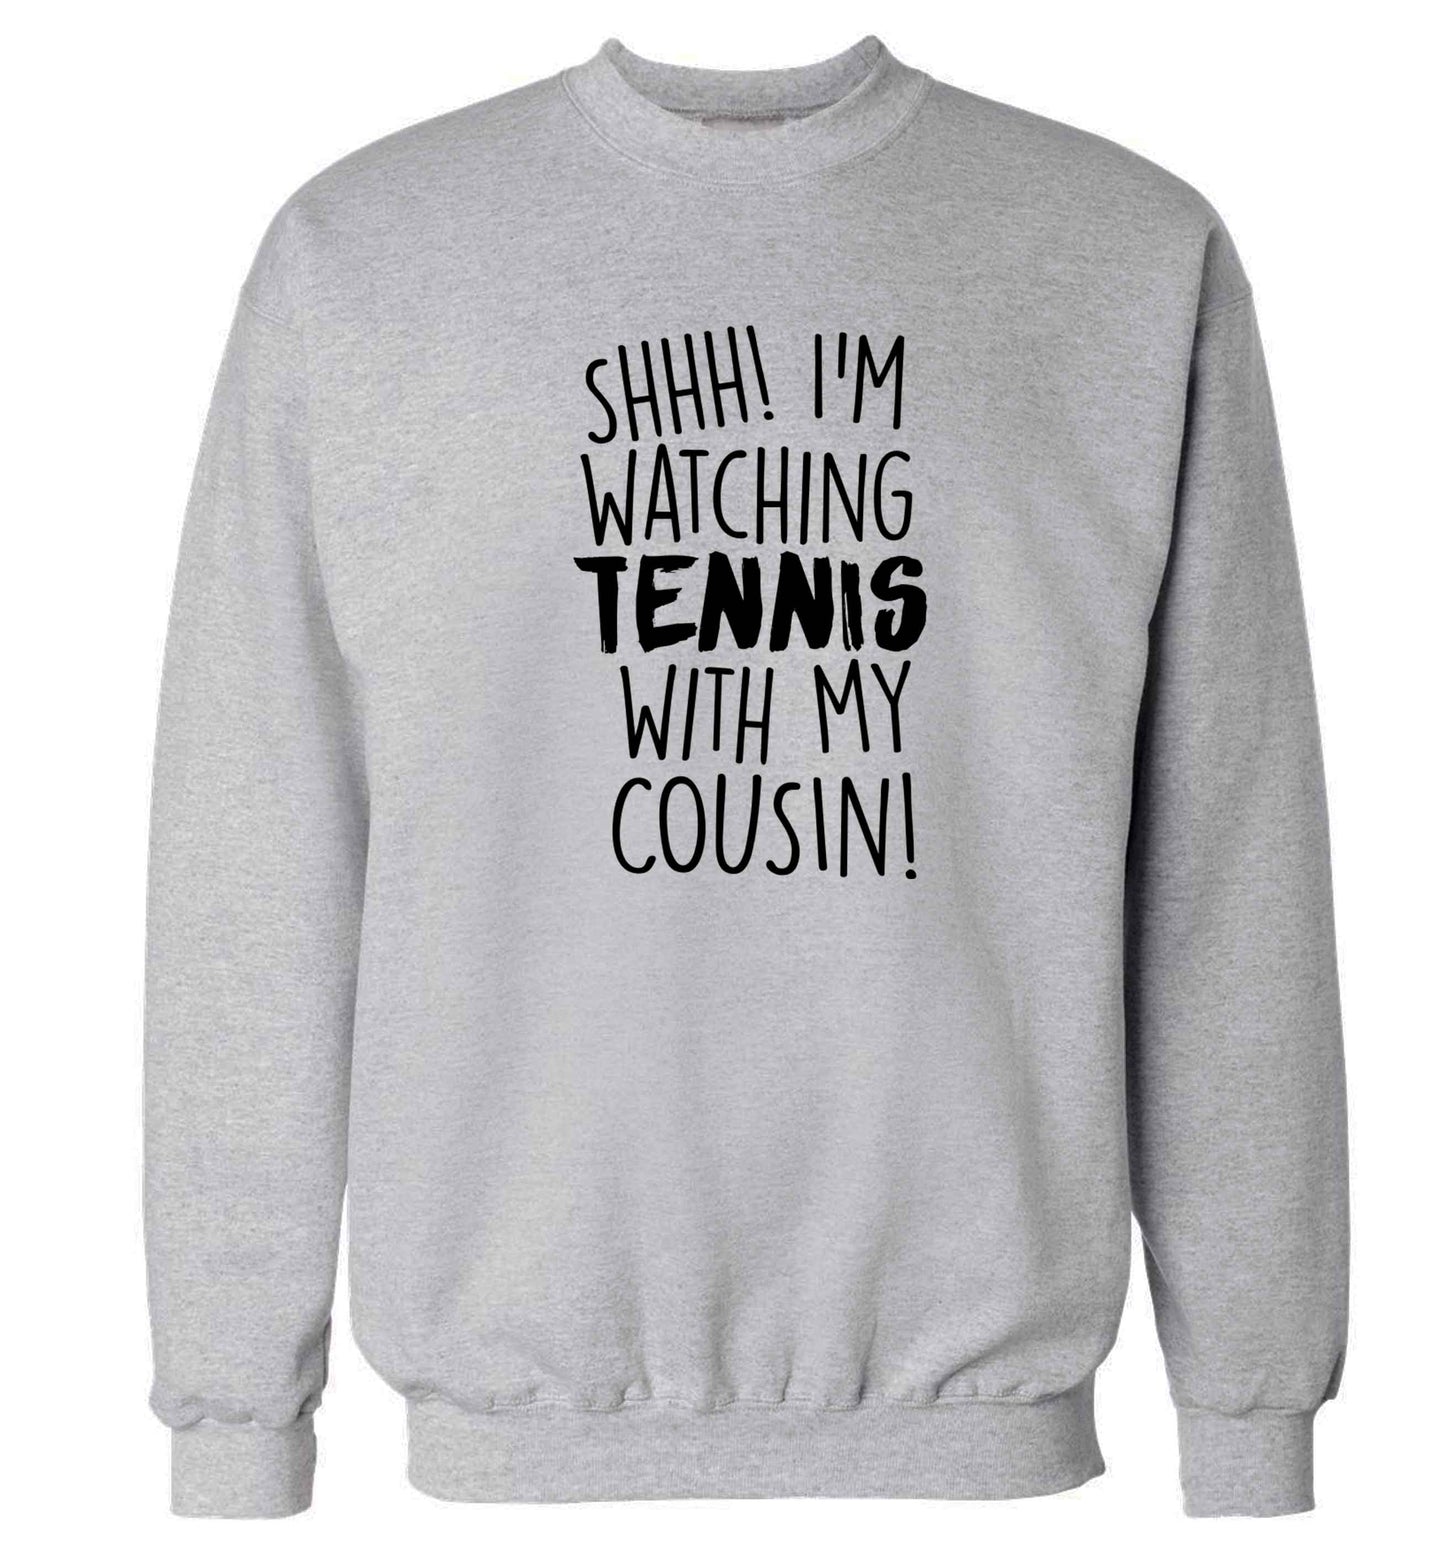 Shh! I'm watching tennis with my cousin! Adult's unisex grey Sweater 2XL